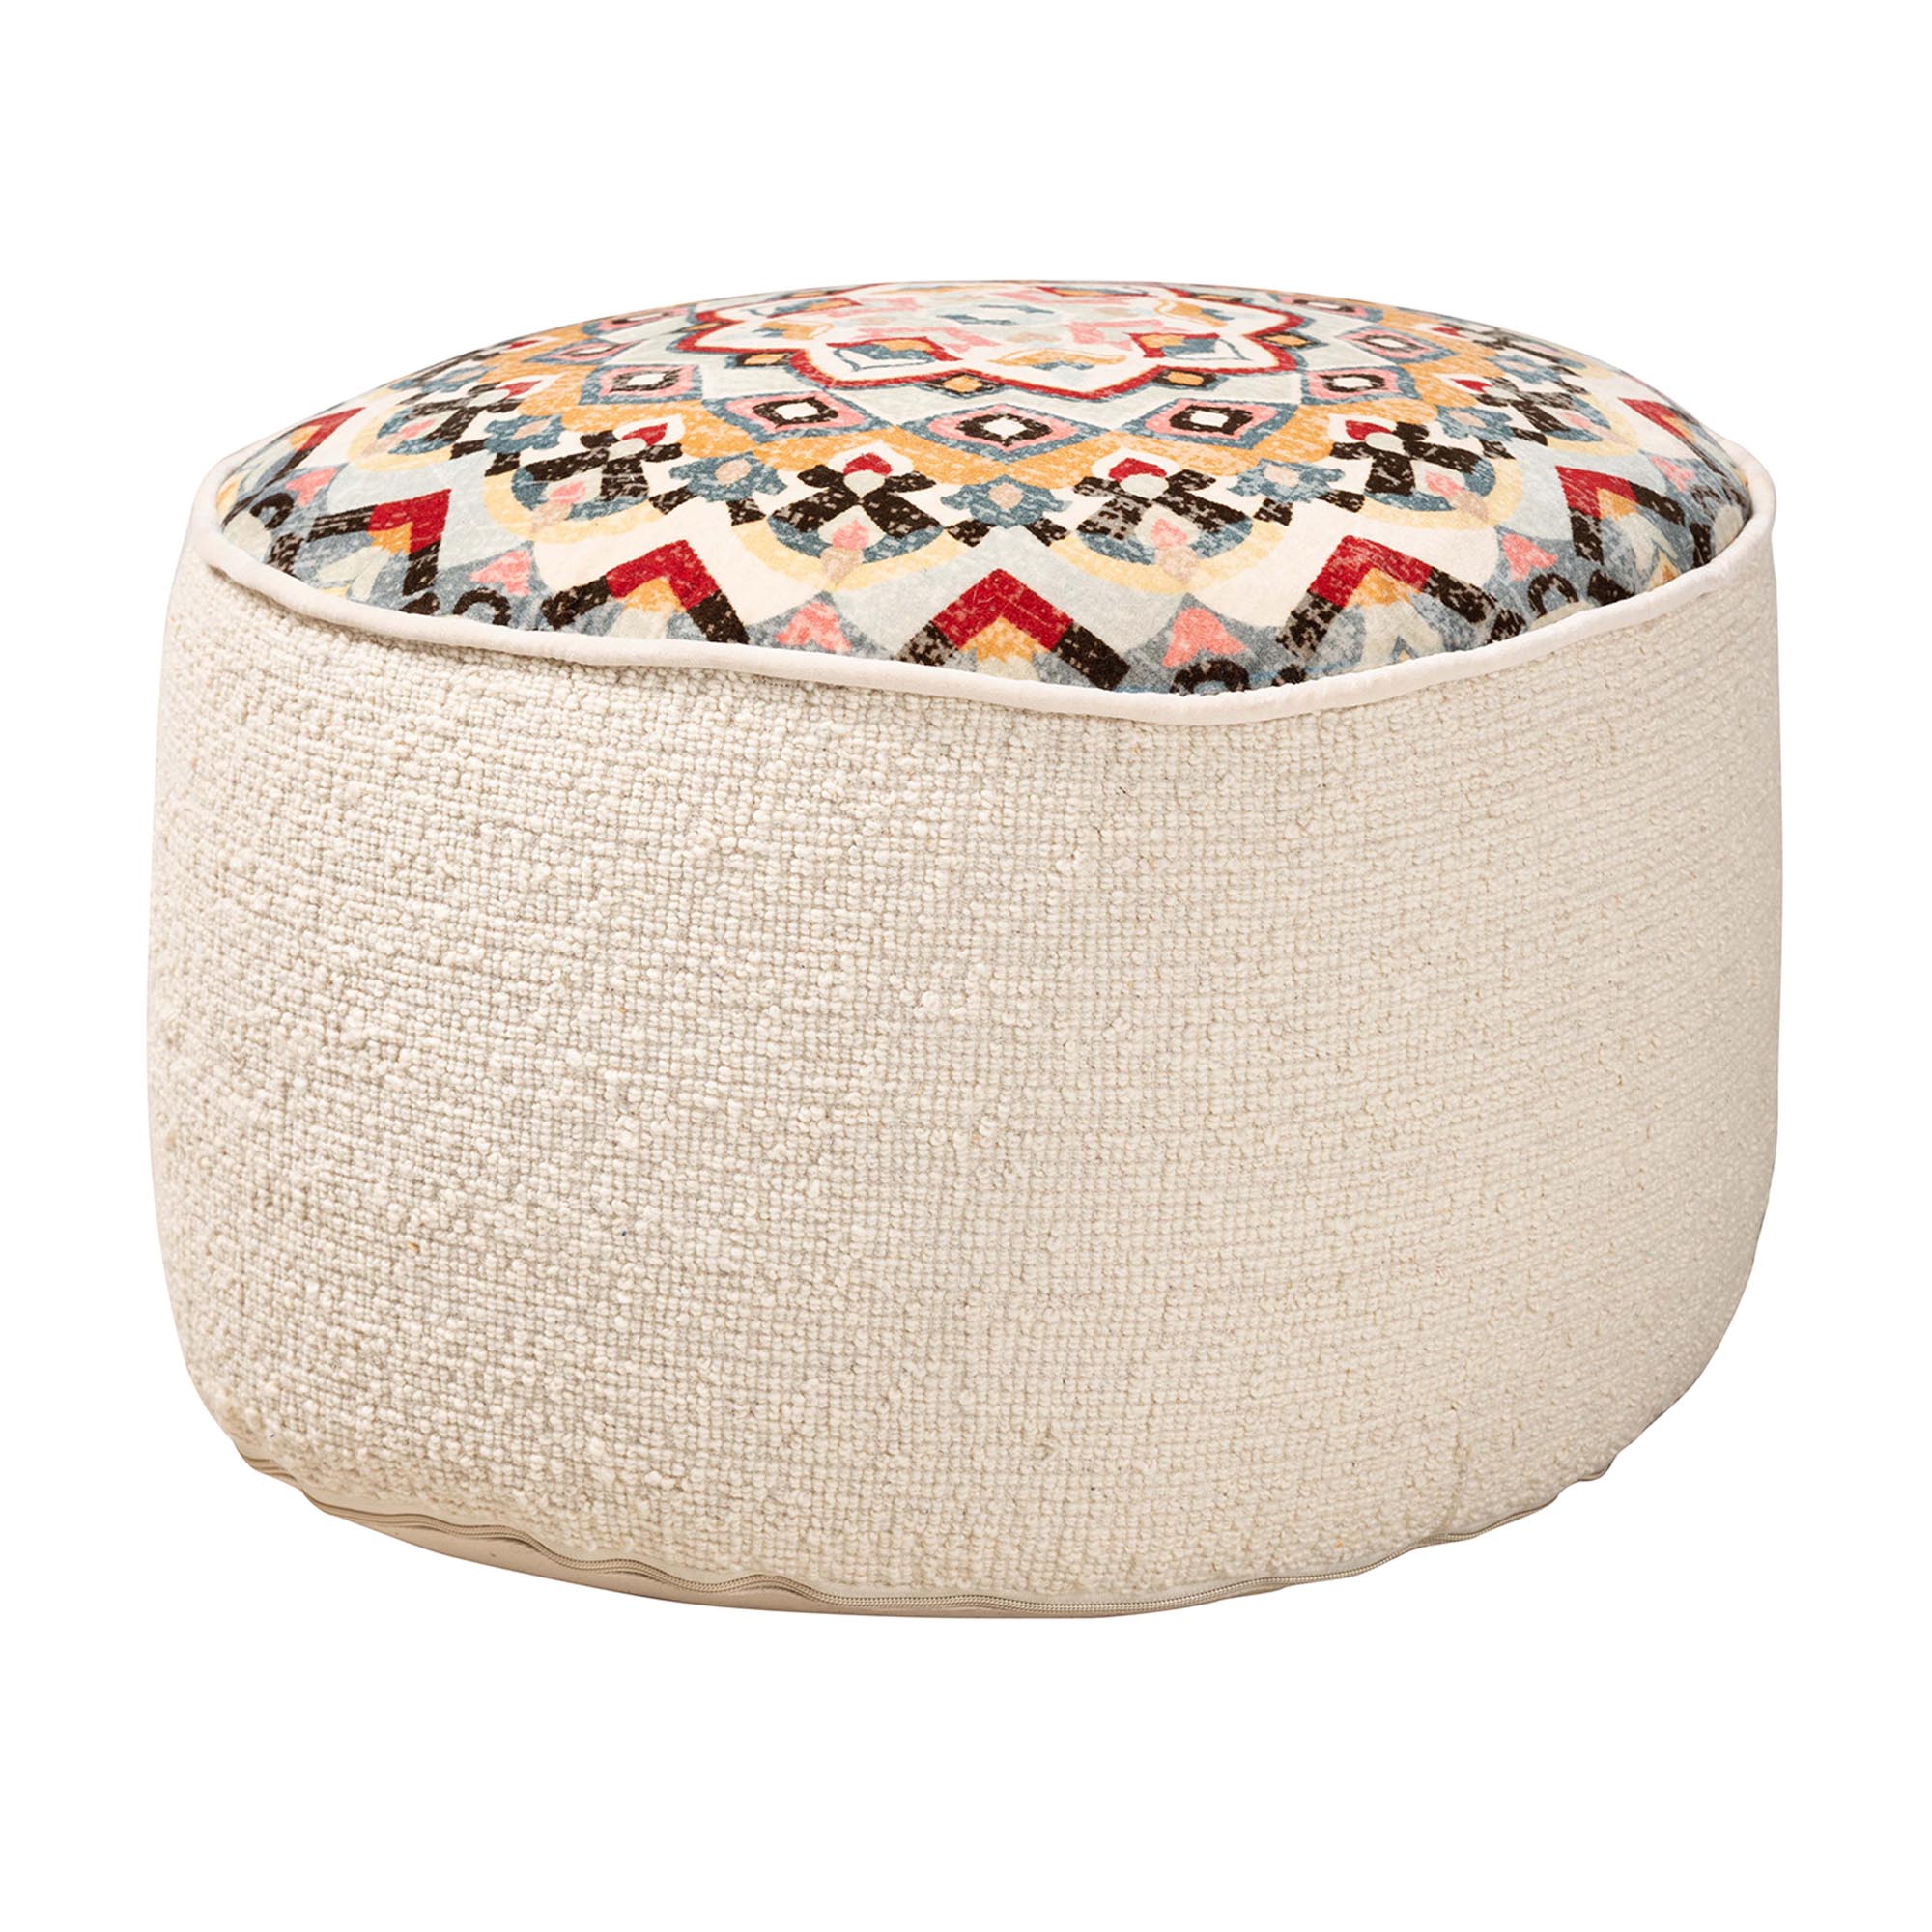 Vintage Round Rattan Low Foot Stool Ottoman or Tuffet with